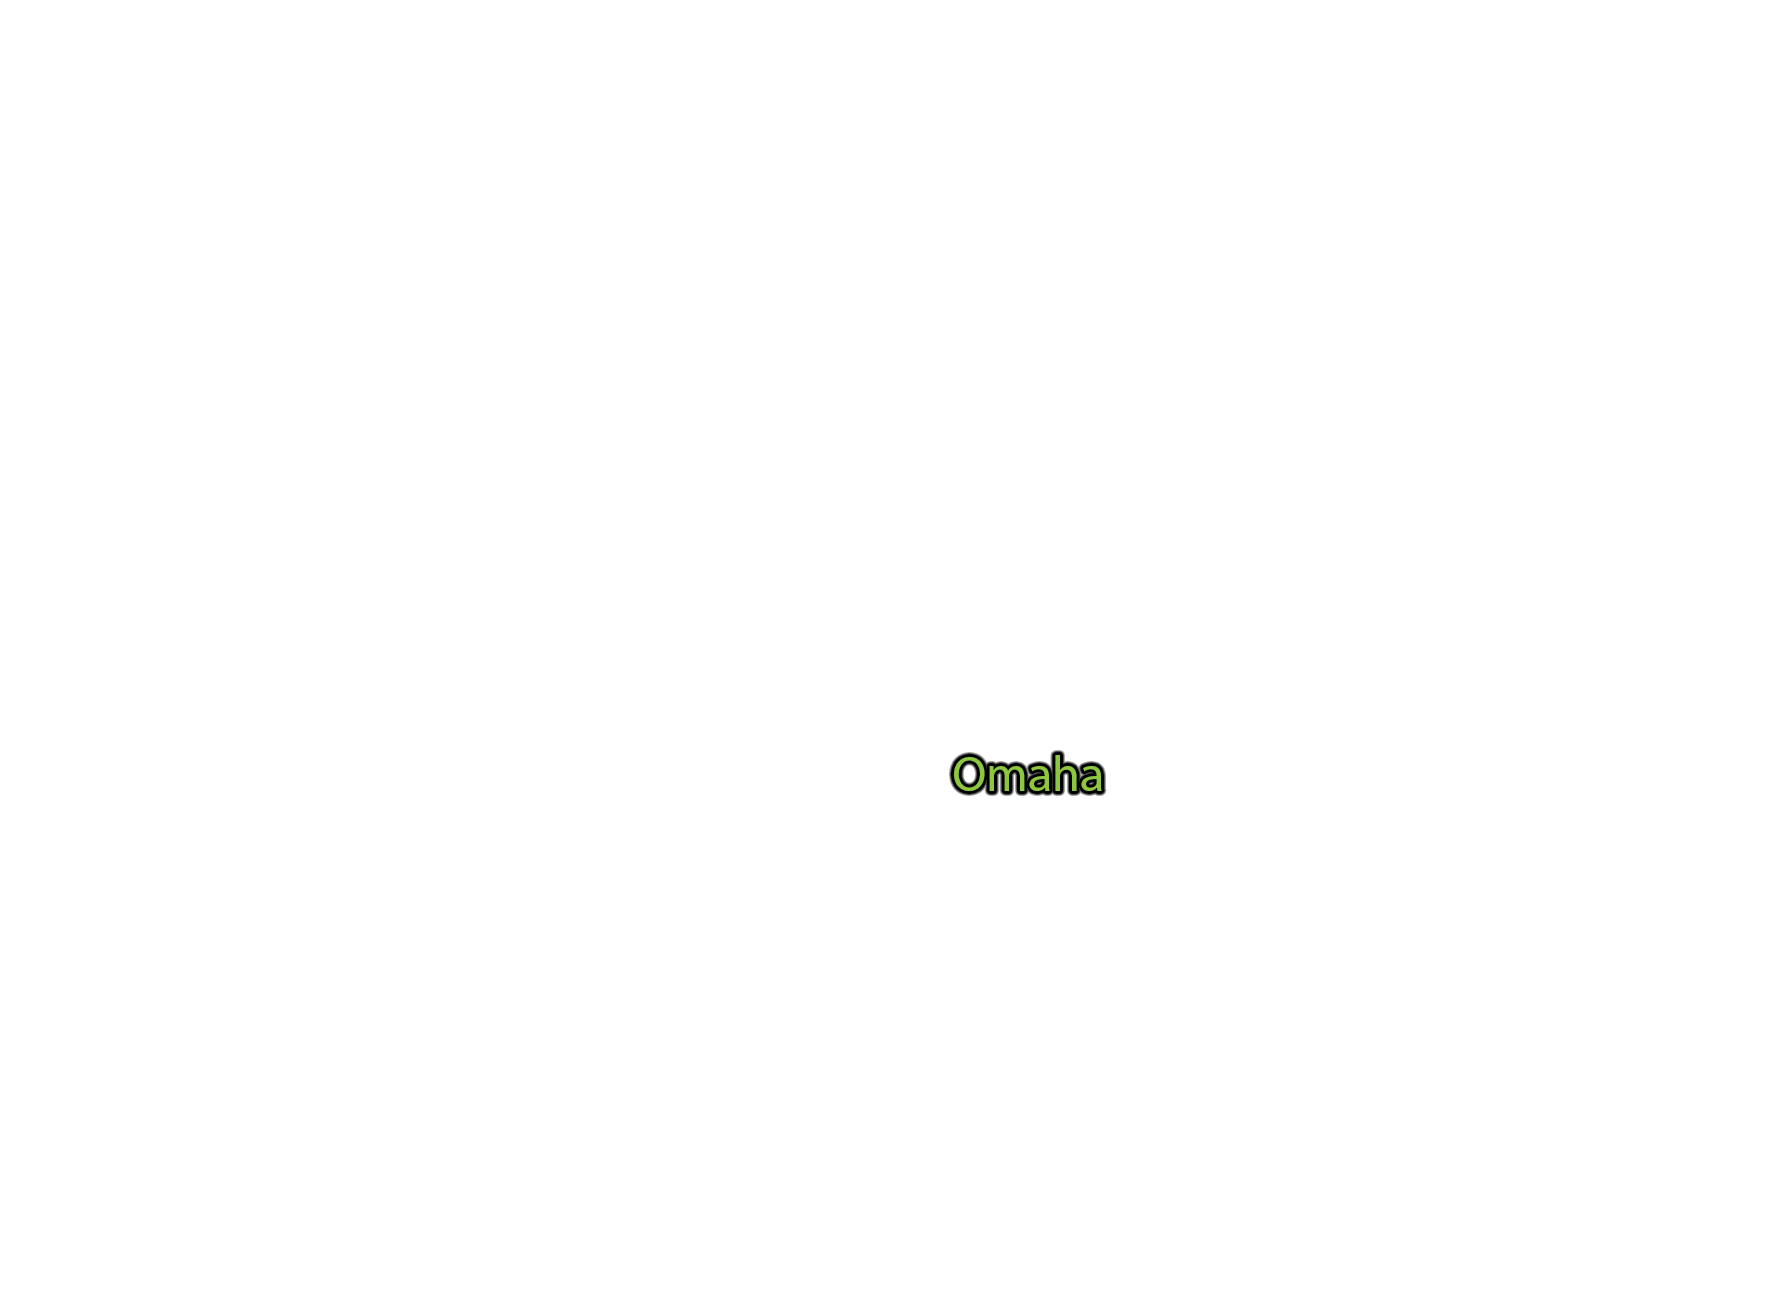 Omaha label with glow